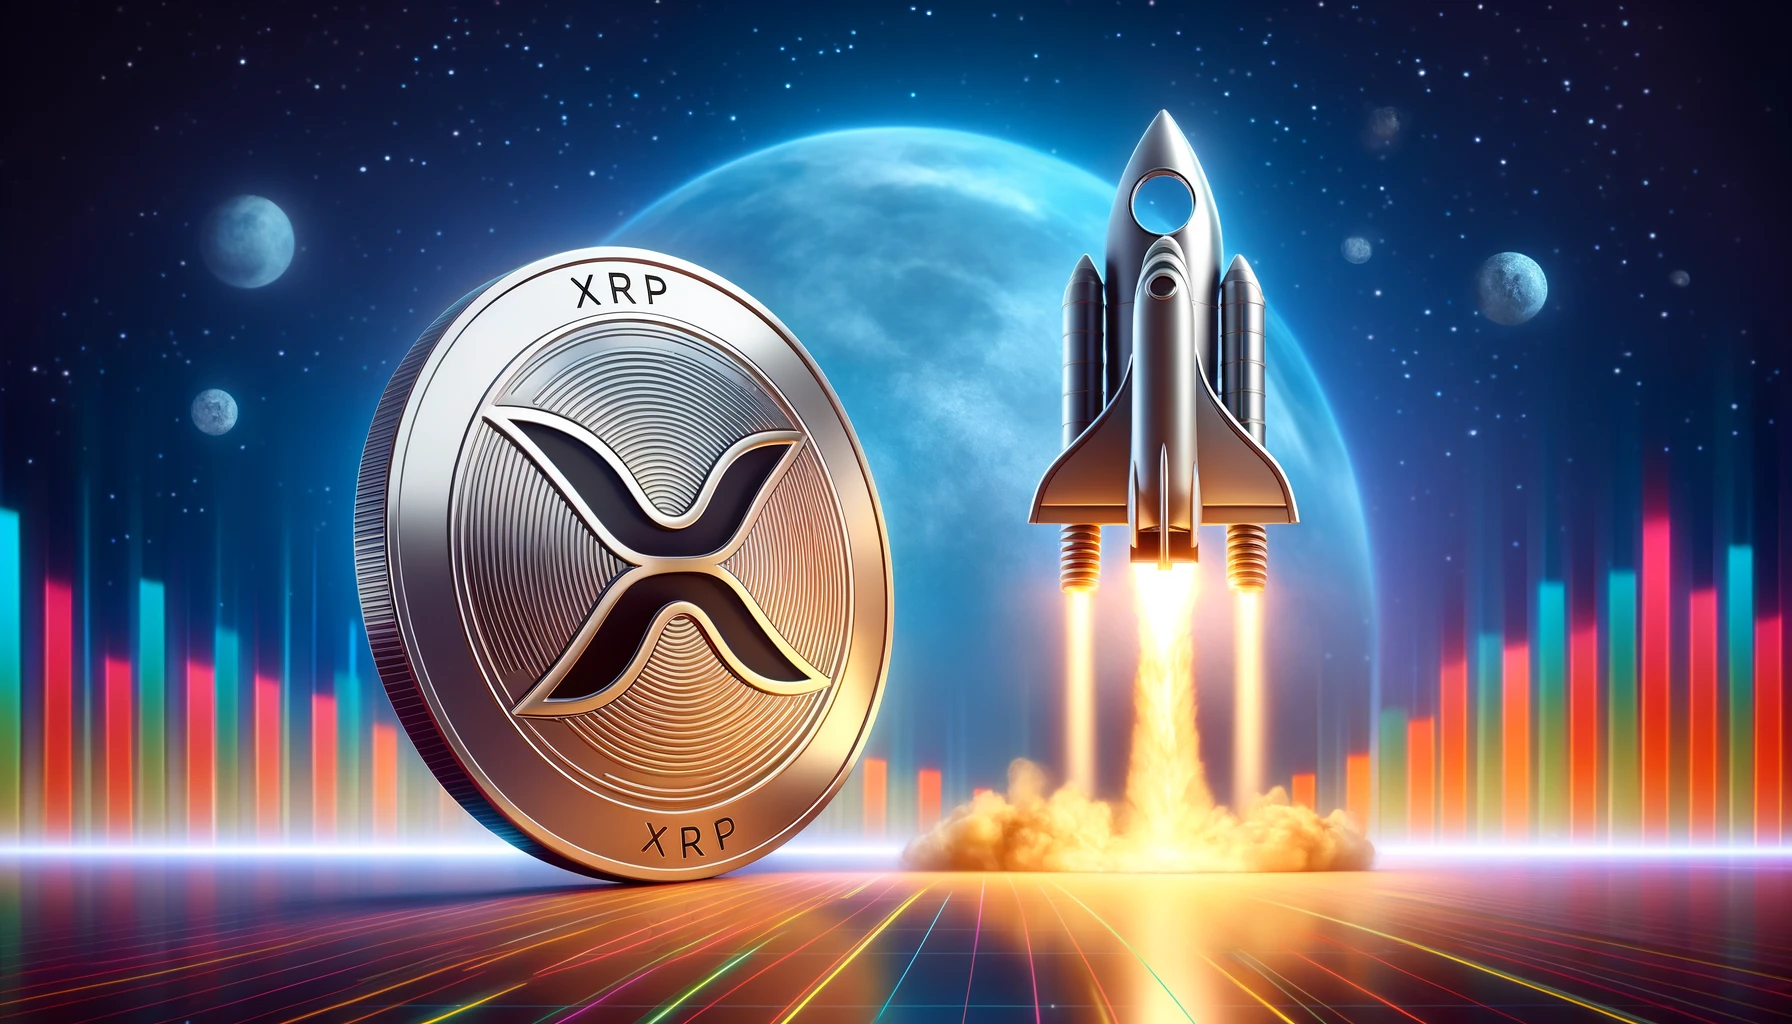 Crypto Analyst Predicts XRP Price Explosion To Over $18